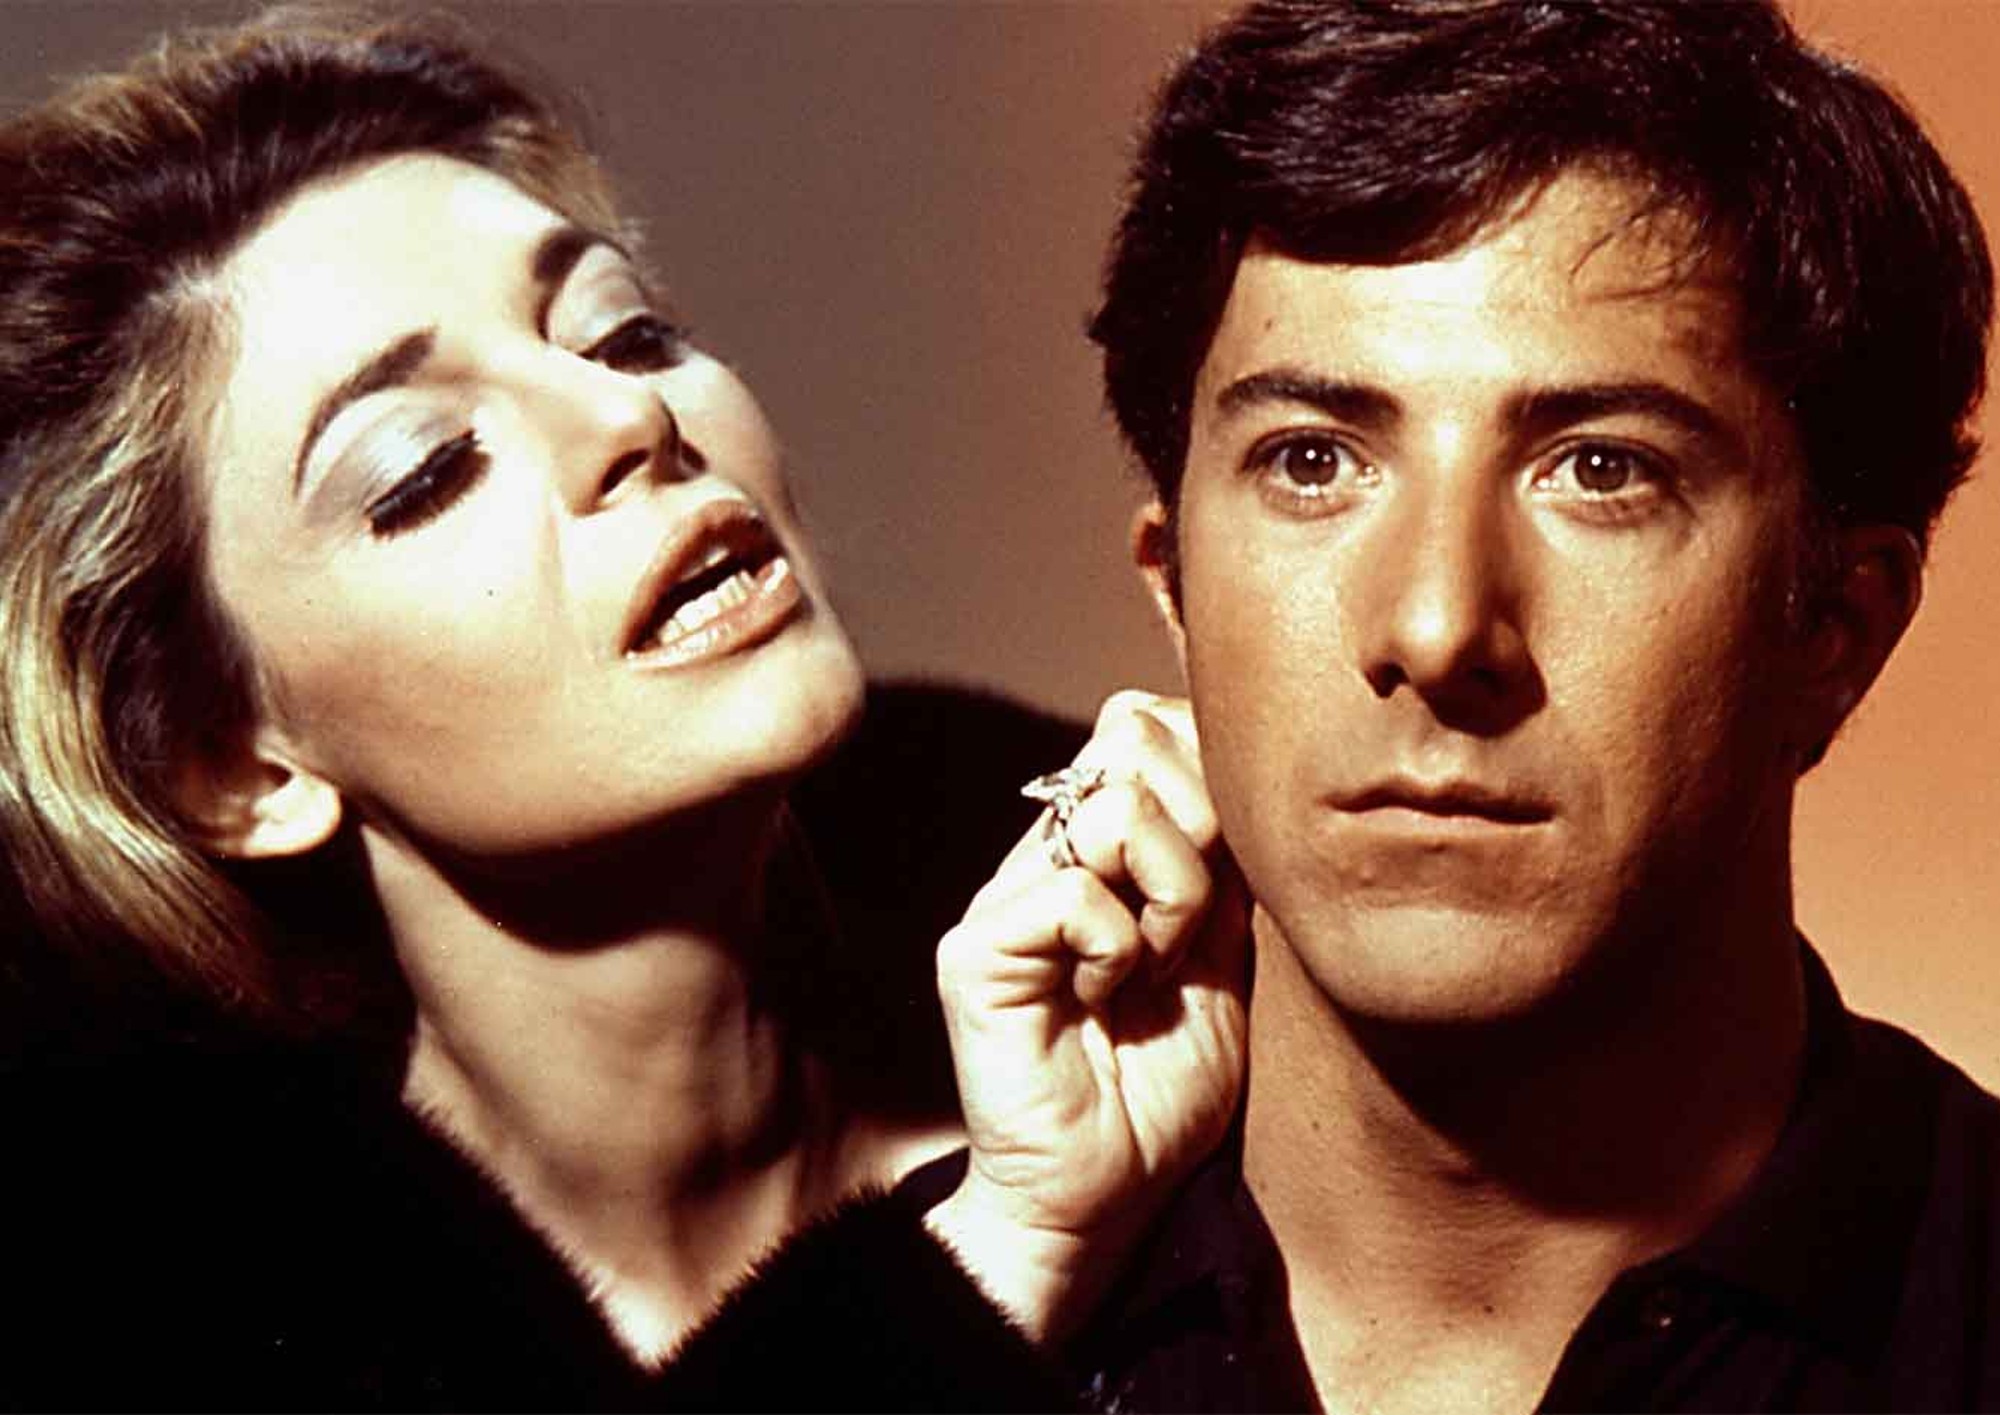 Image from the motion picture The Graduate